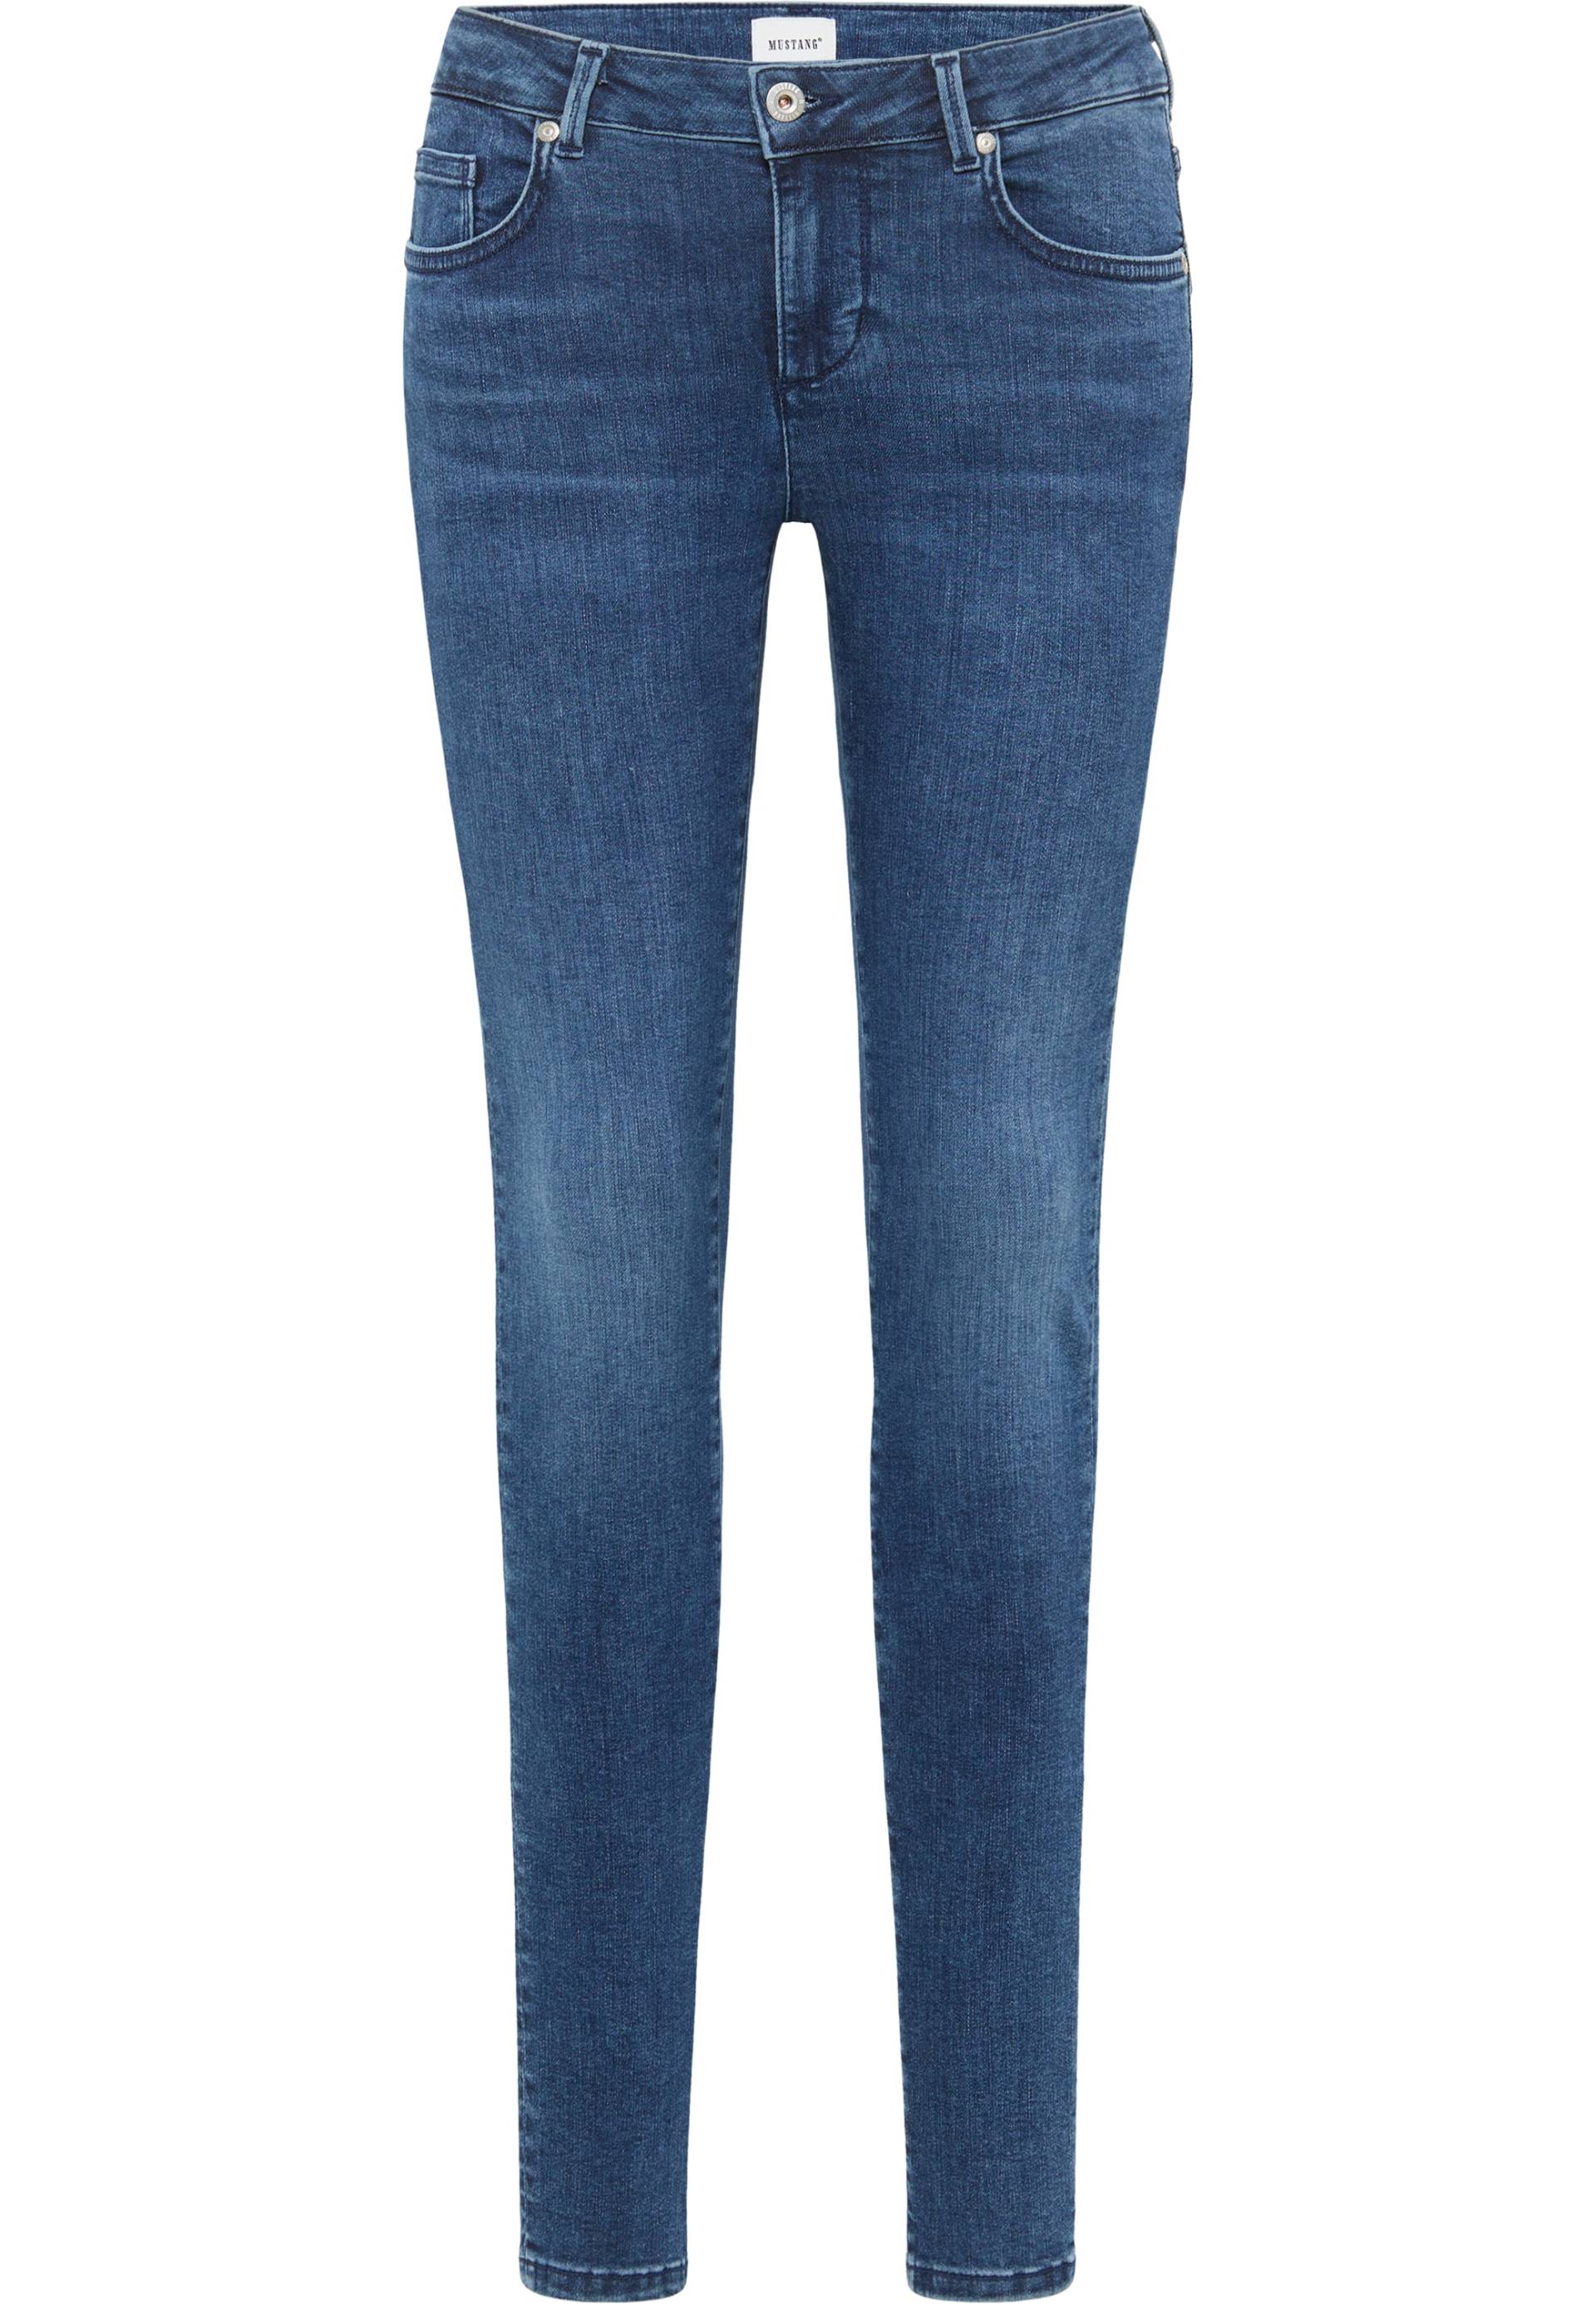 MUSTANG Skinny-fit-Jeans »Style Quincy Skinny« von mustang